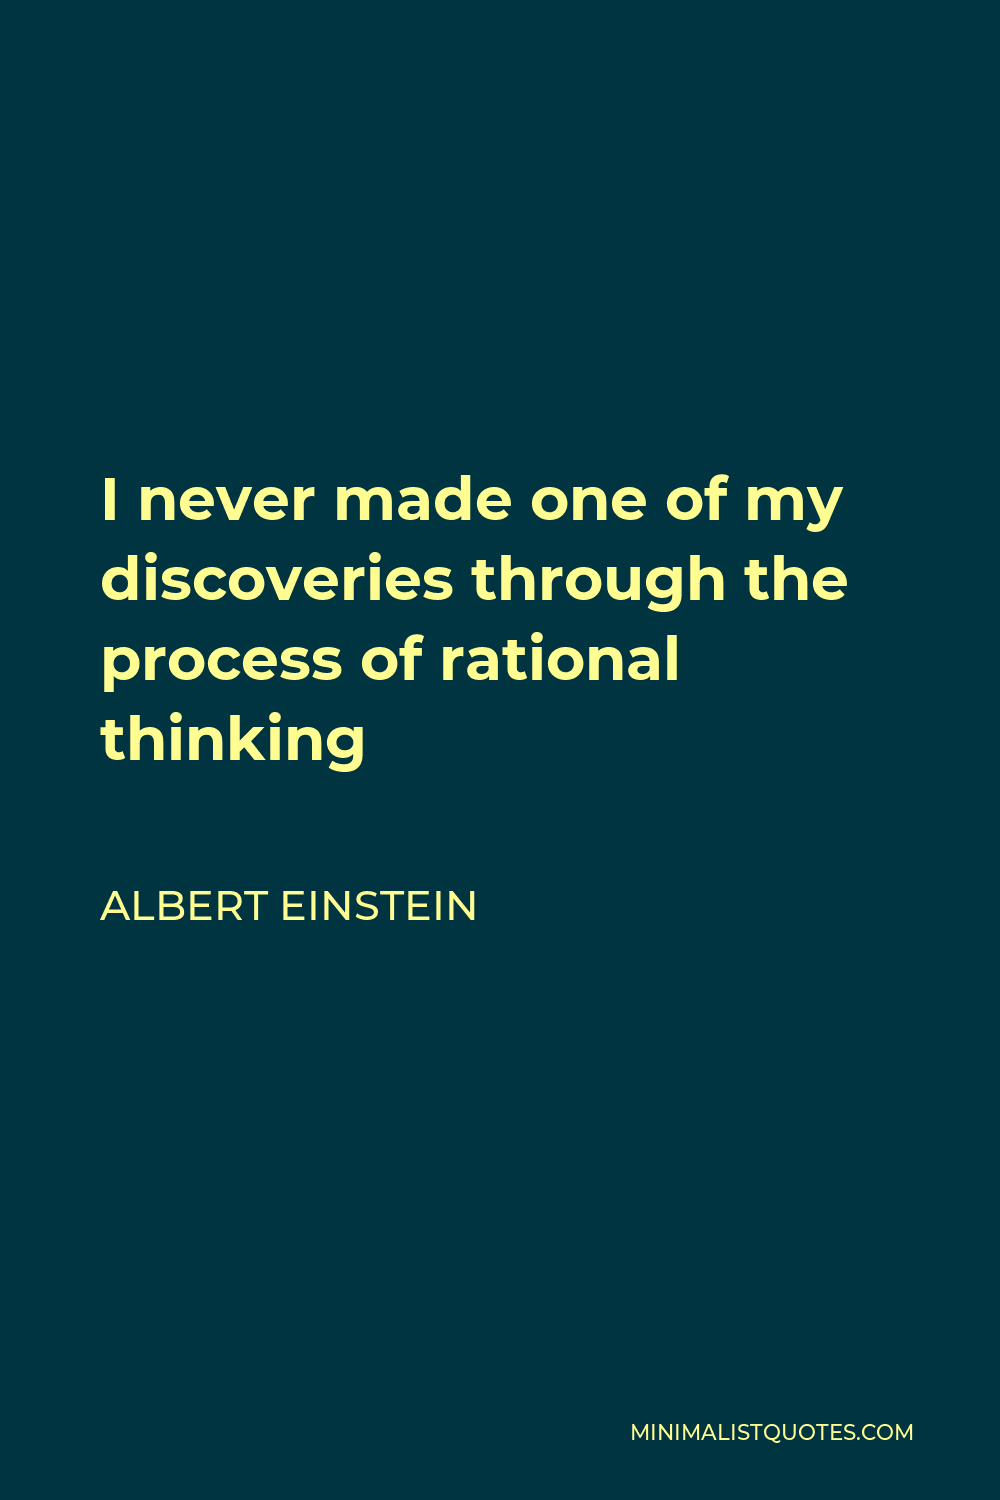 Albert Einstein Quote - I never made one of my discoveries through the process of rational thinking